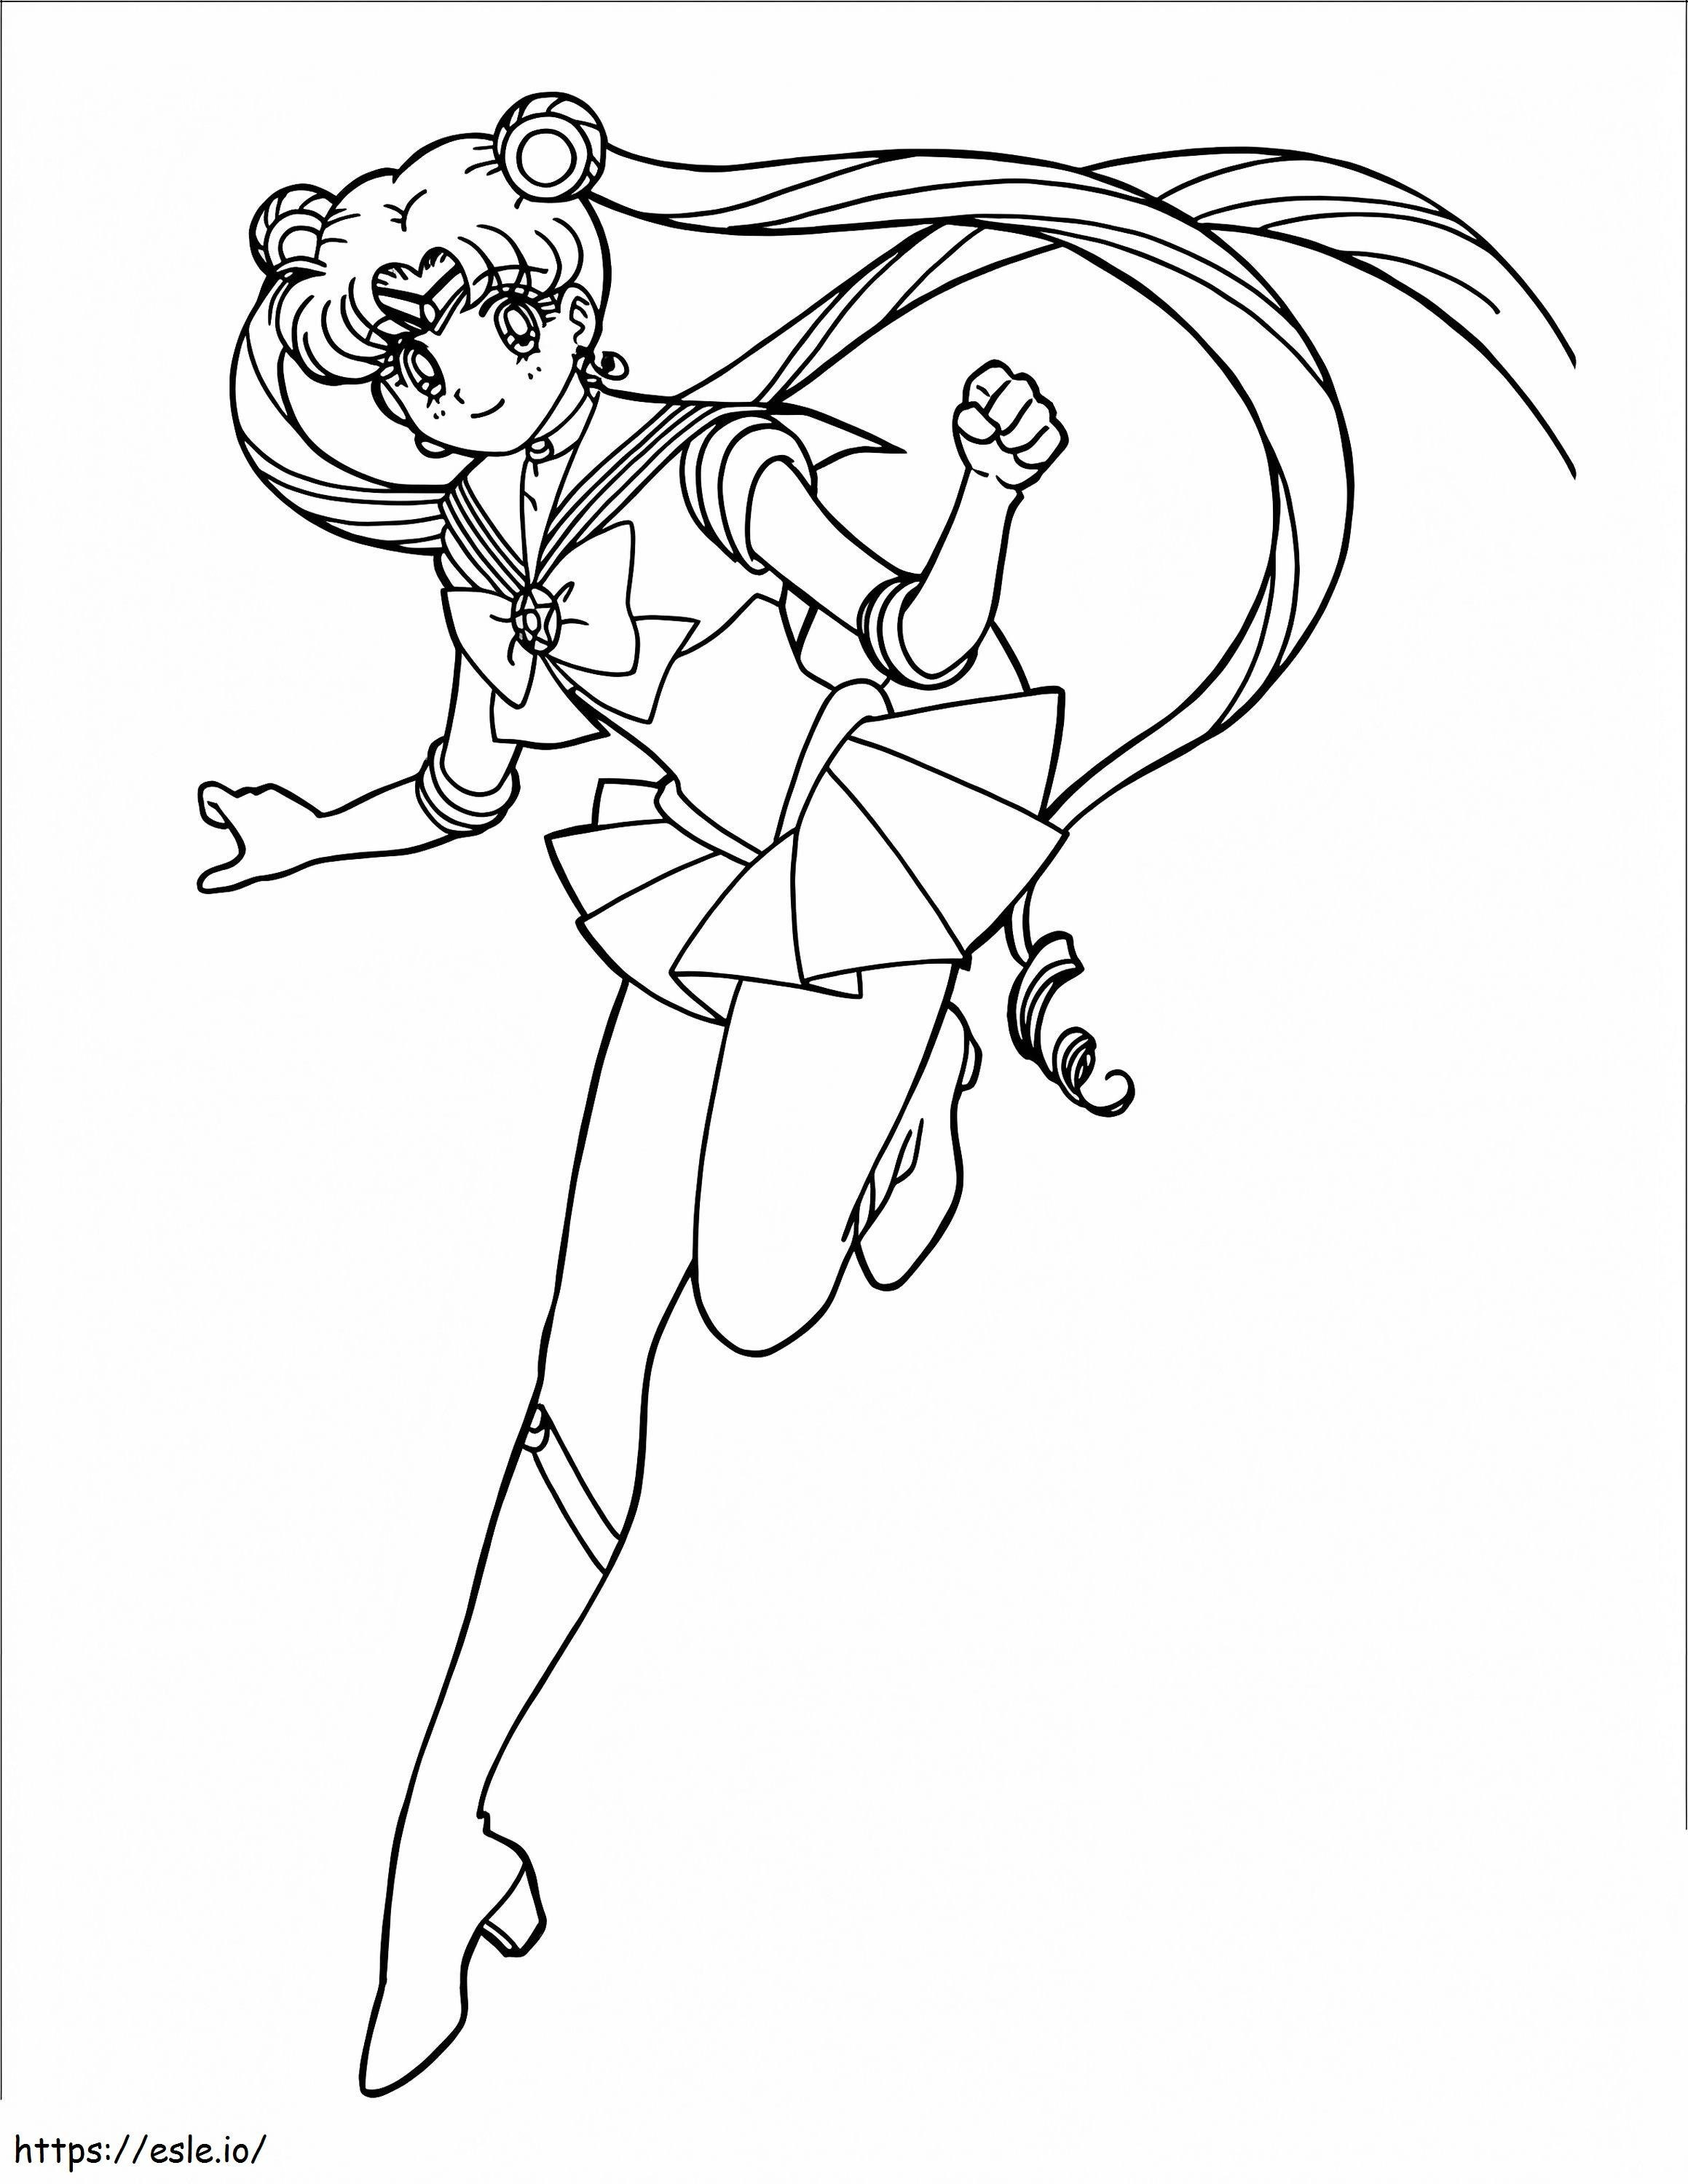 Lovely Sailor Moon coloring page